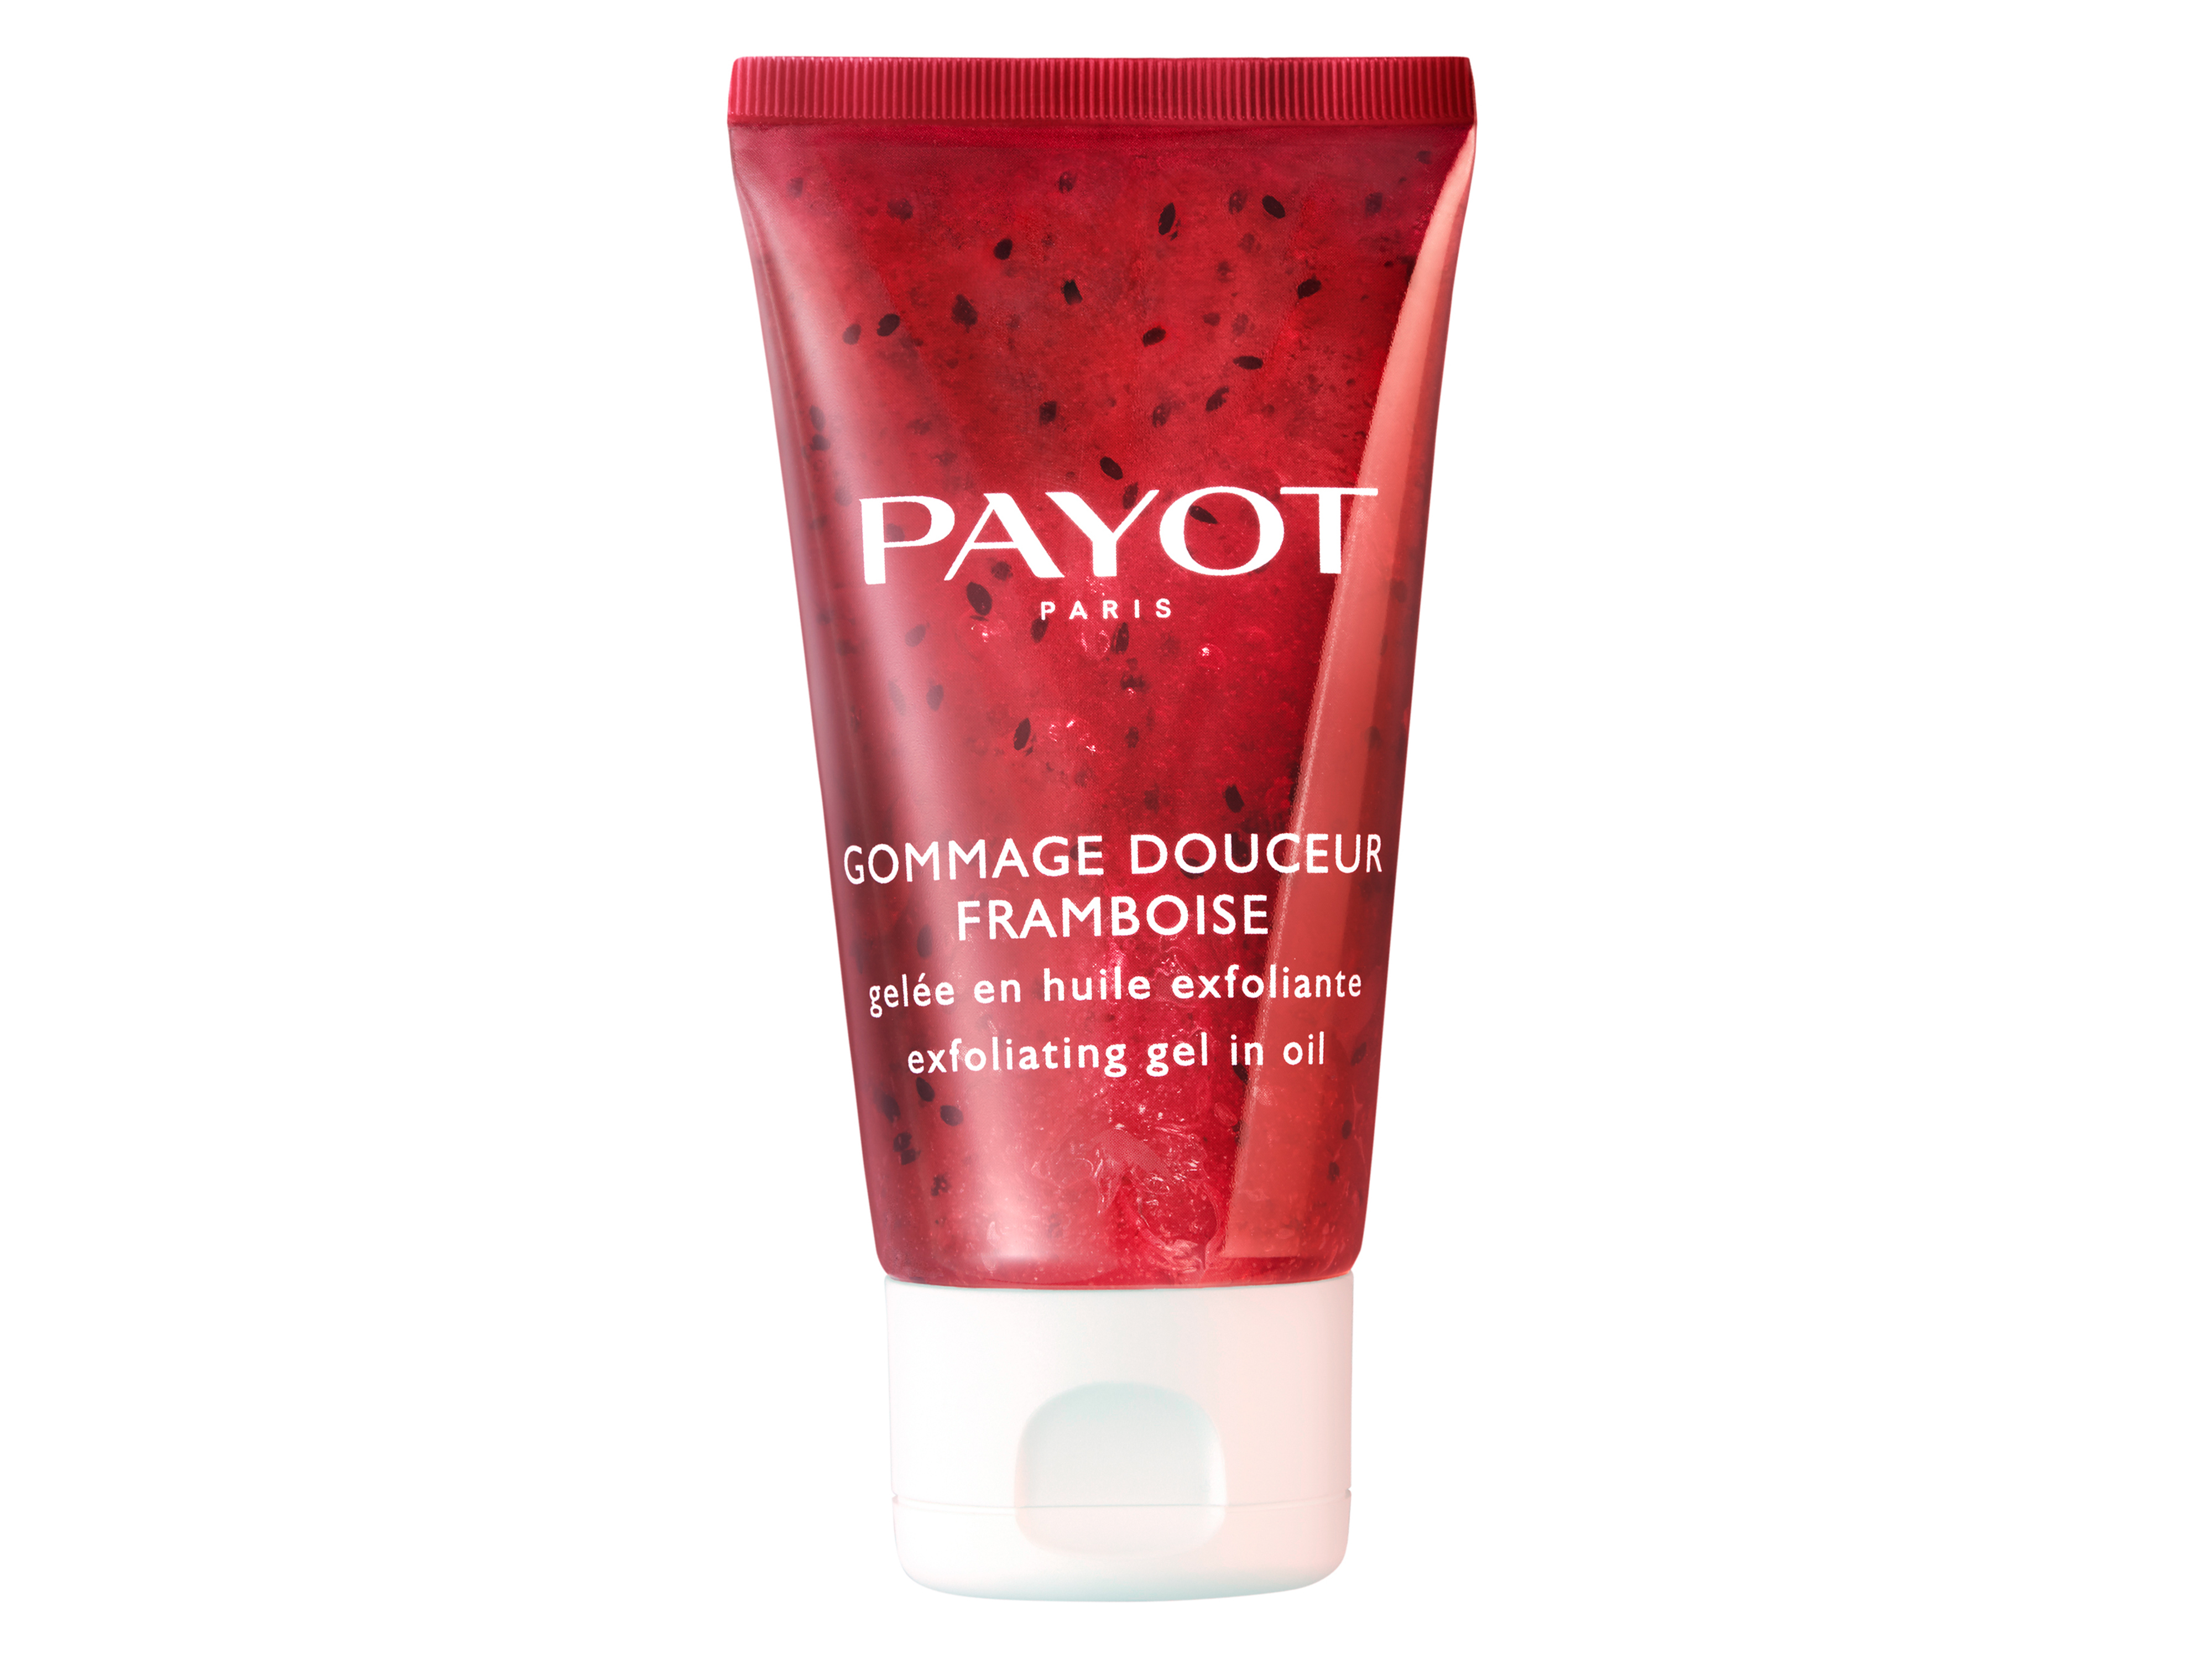 Payot Gommage Douceur Framboise, 50 ml